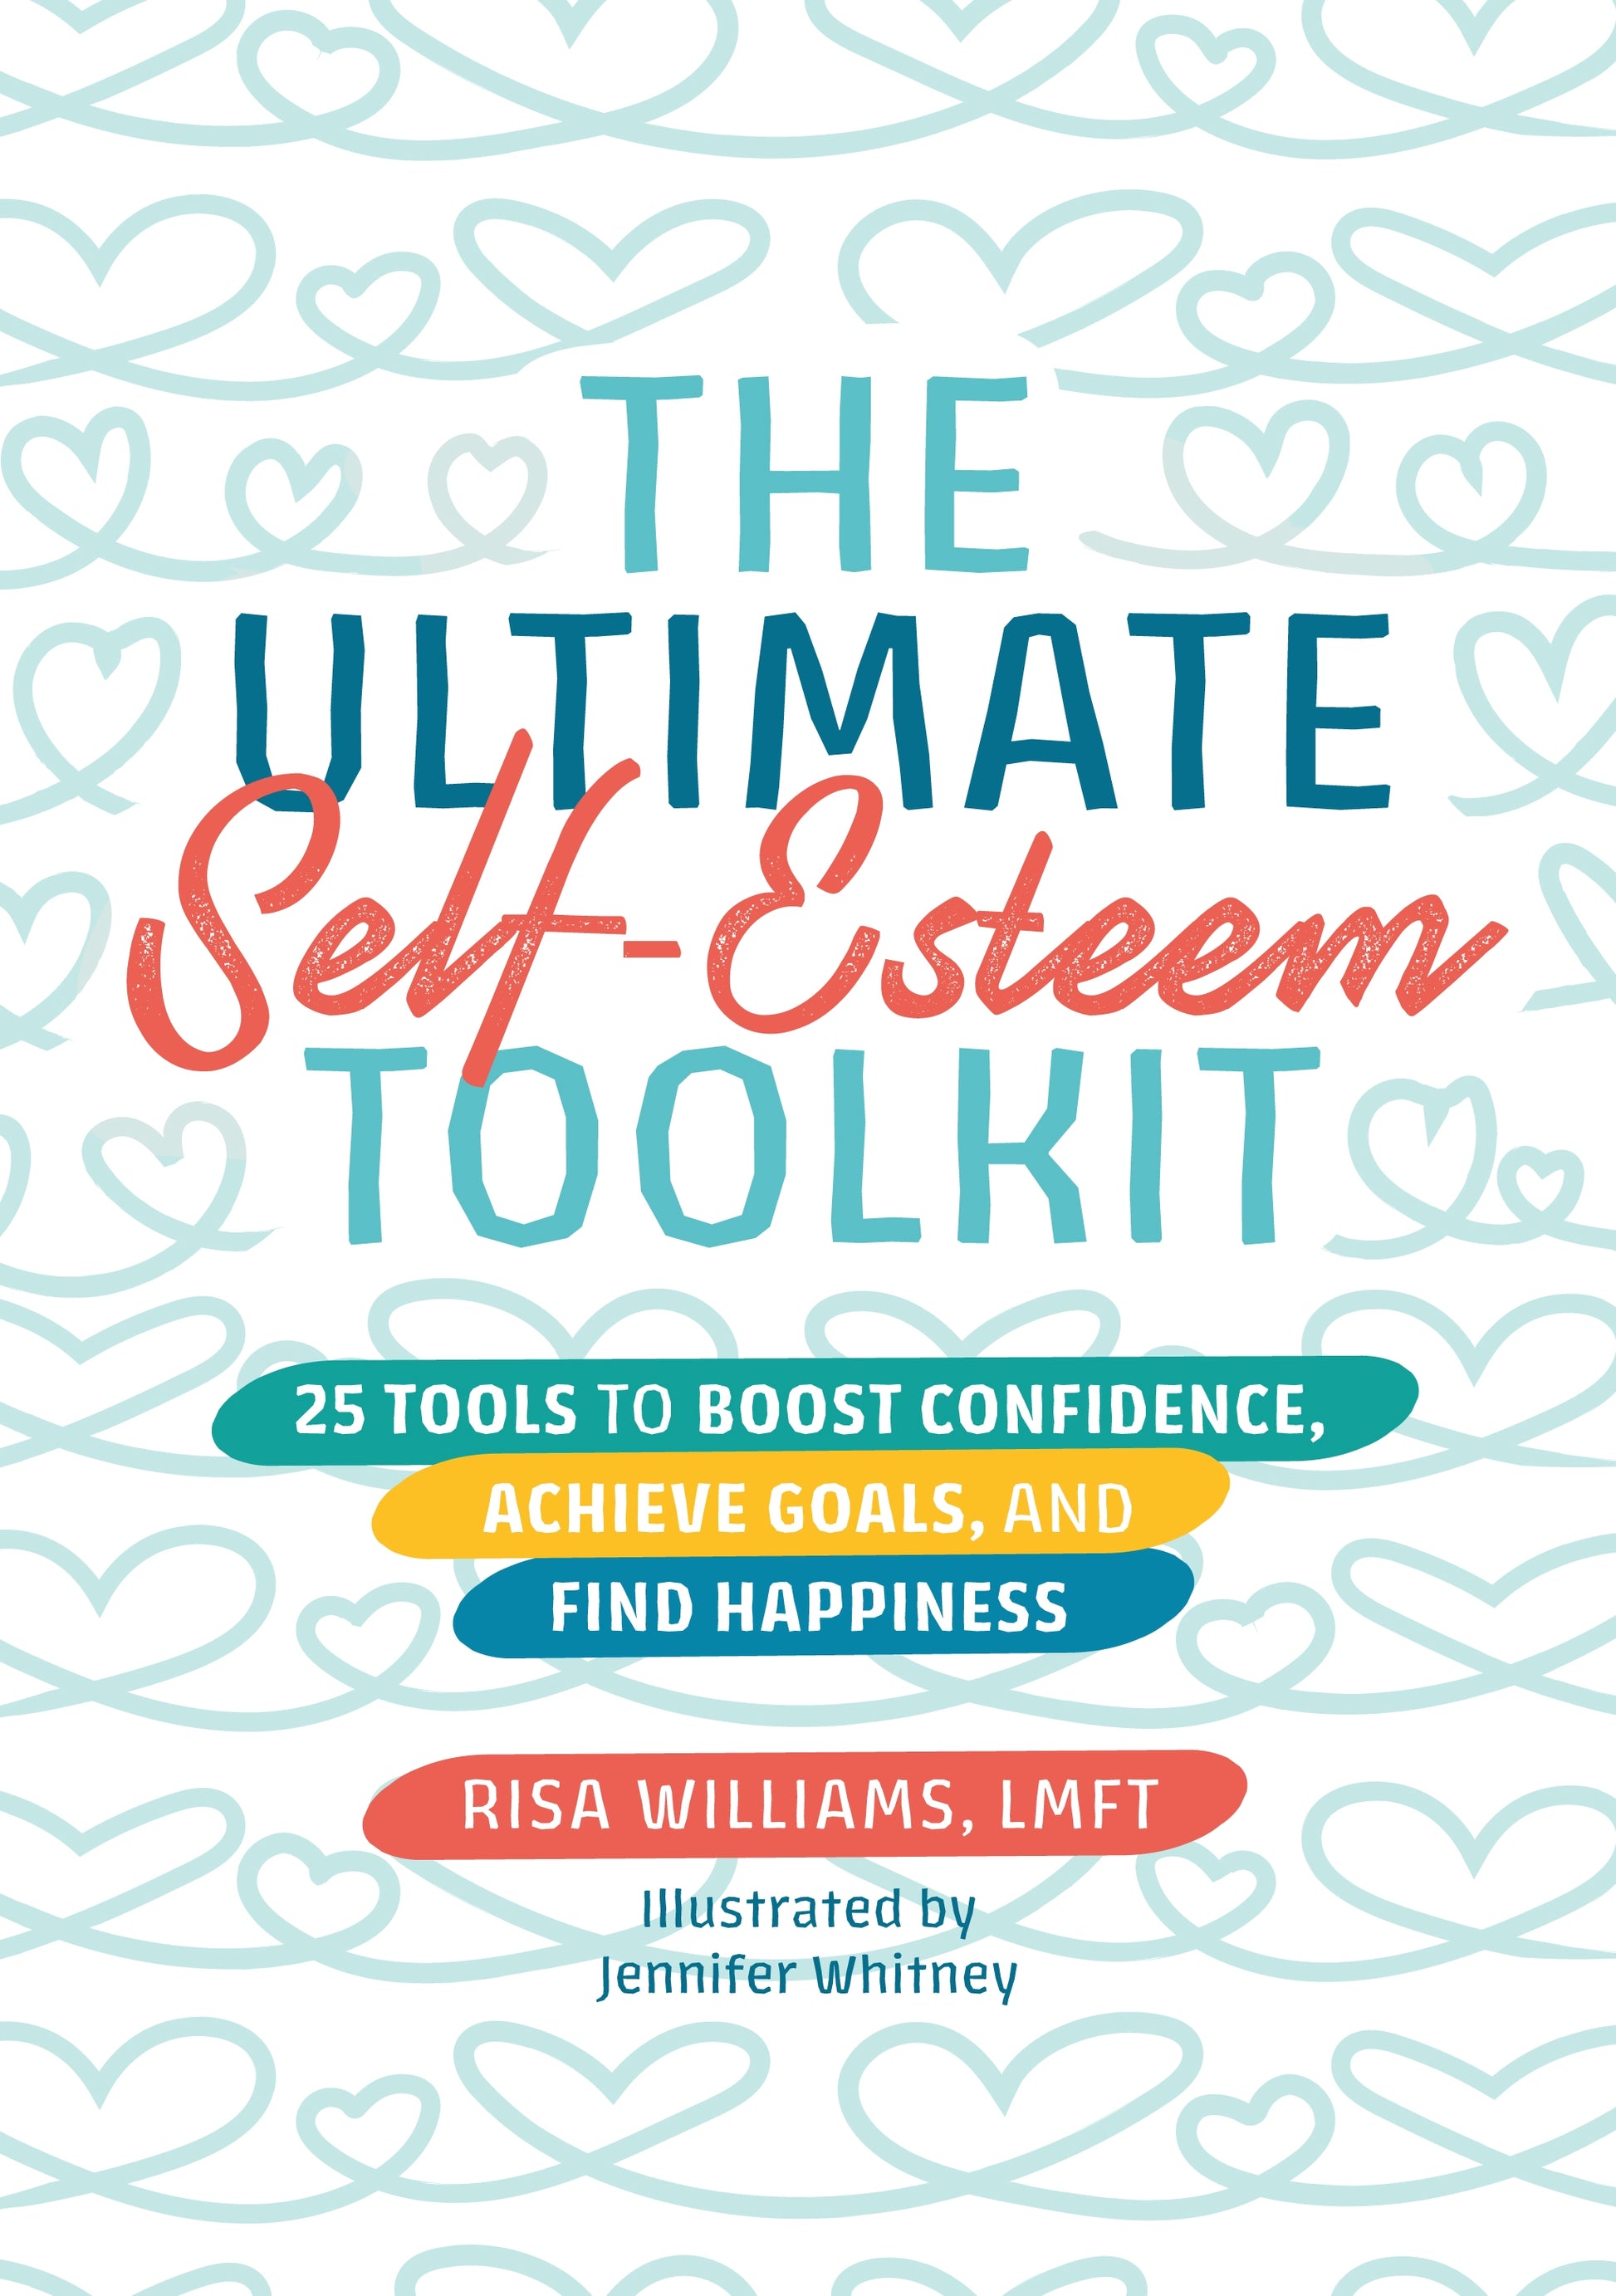 The Ultimate Self-Esteem Toolkit by Risa Williams